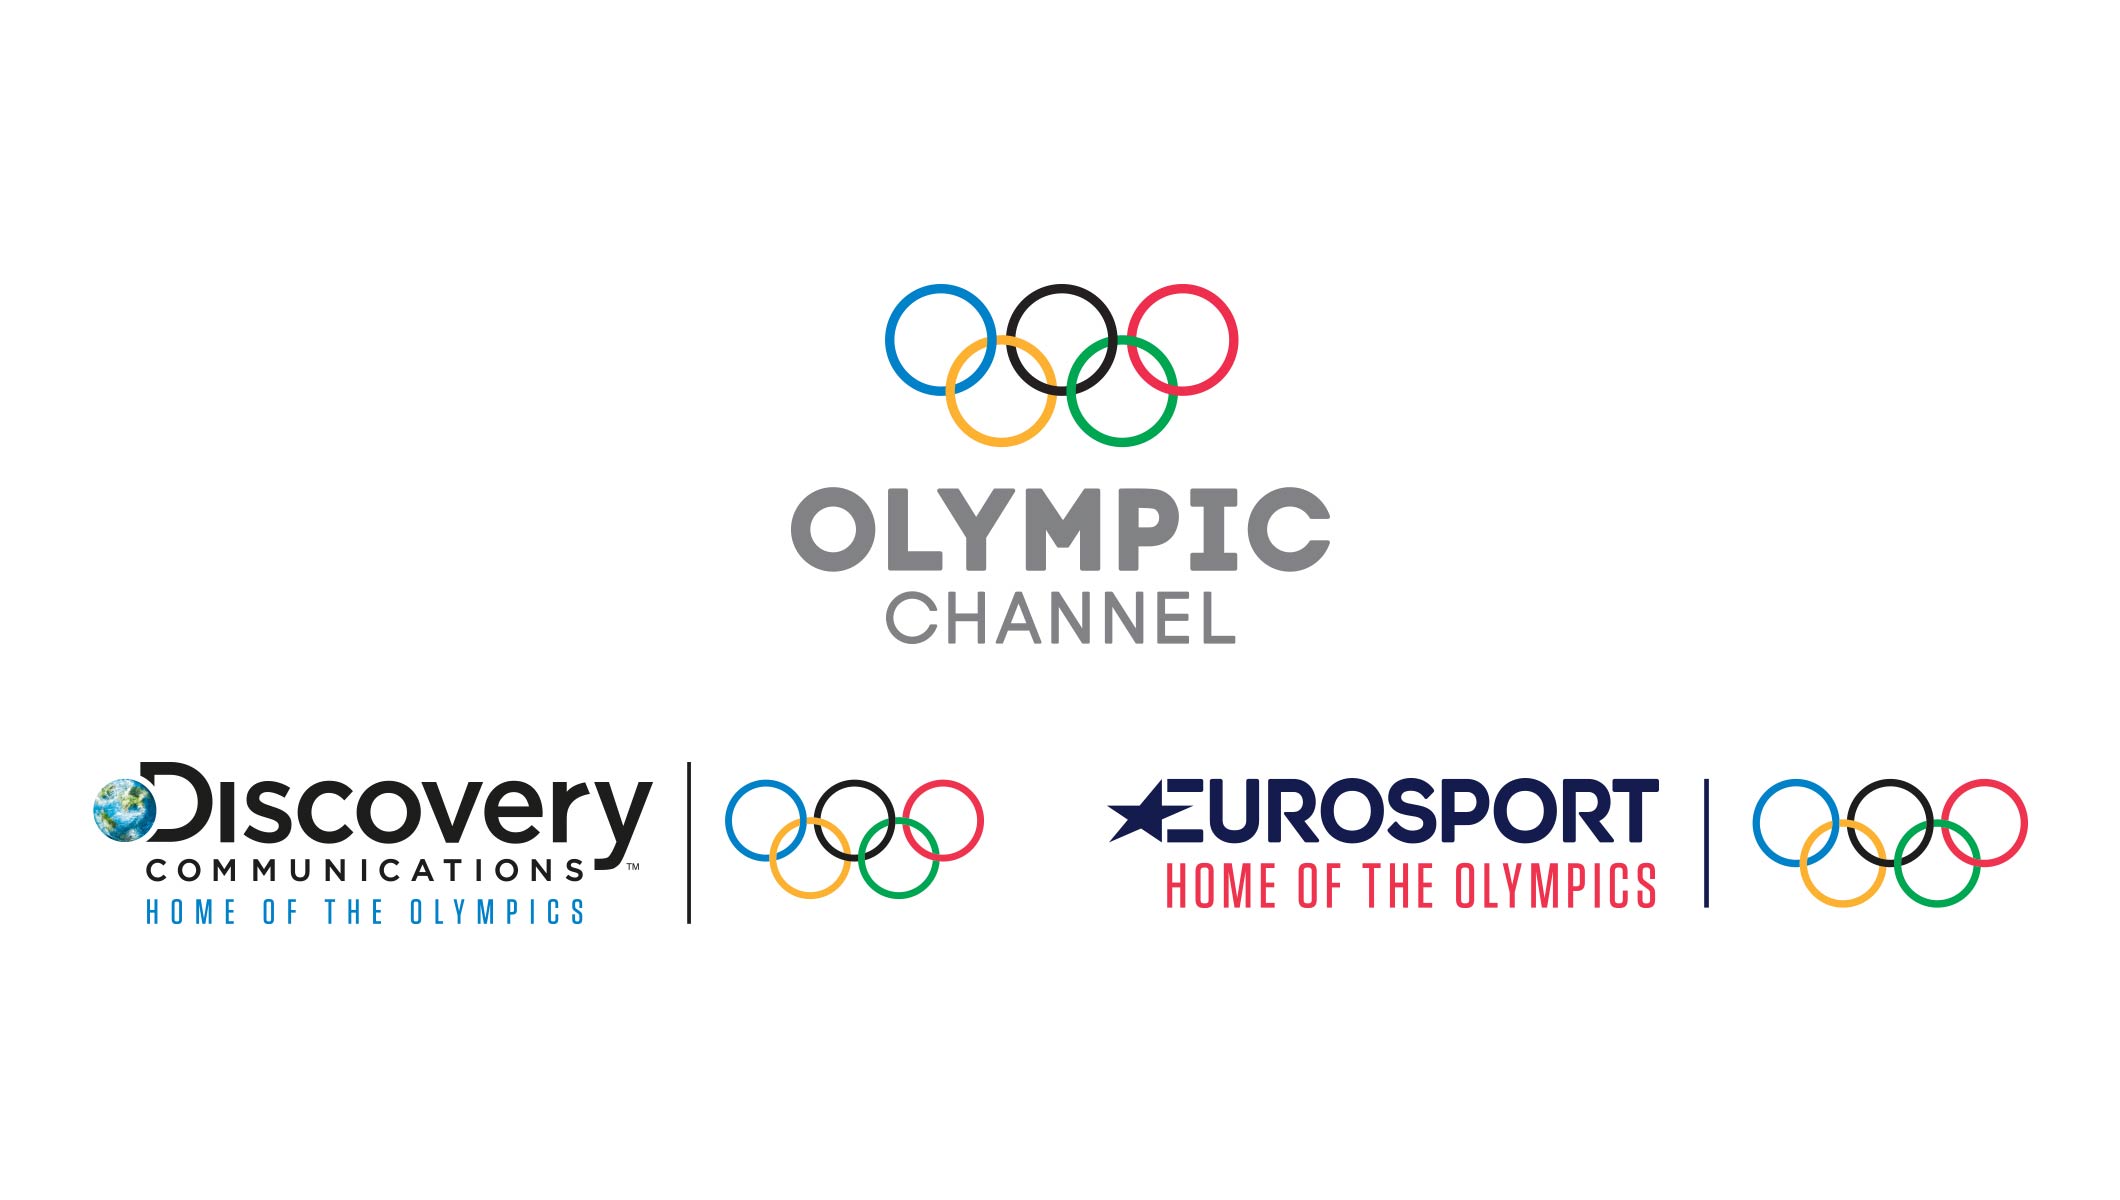 Olympic flame to burn brighter all year-round with new Discovery Communications and Olympic Channel partnership in Europe